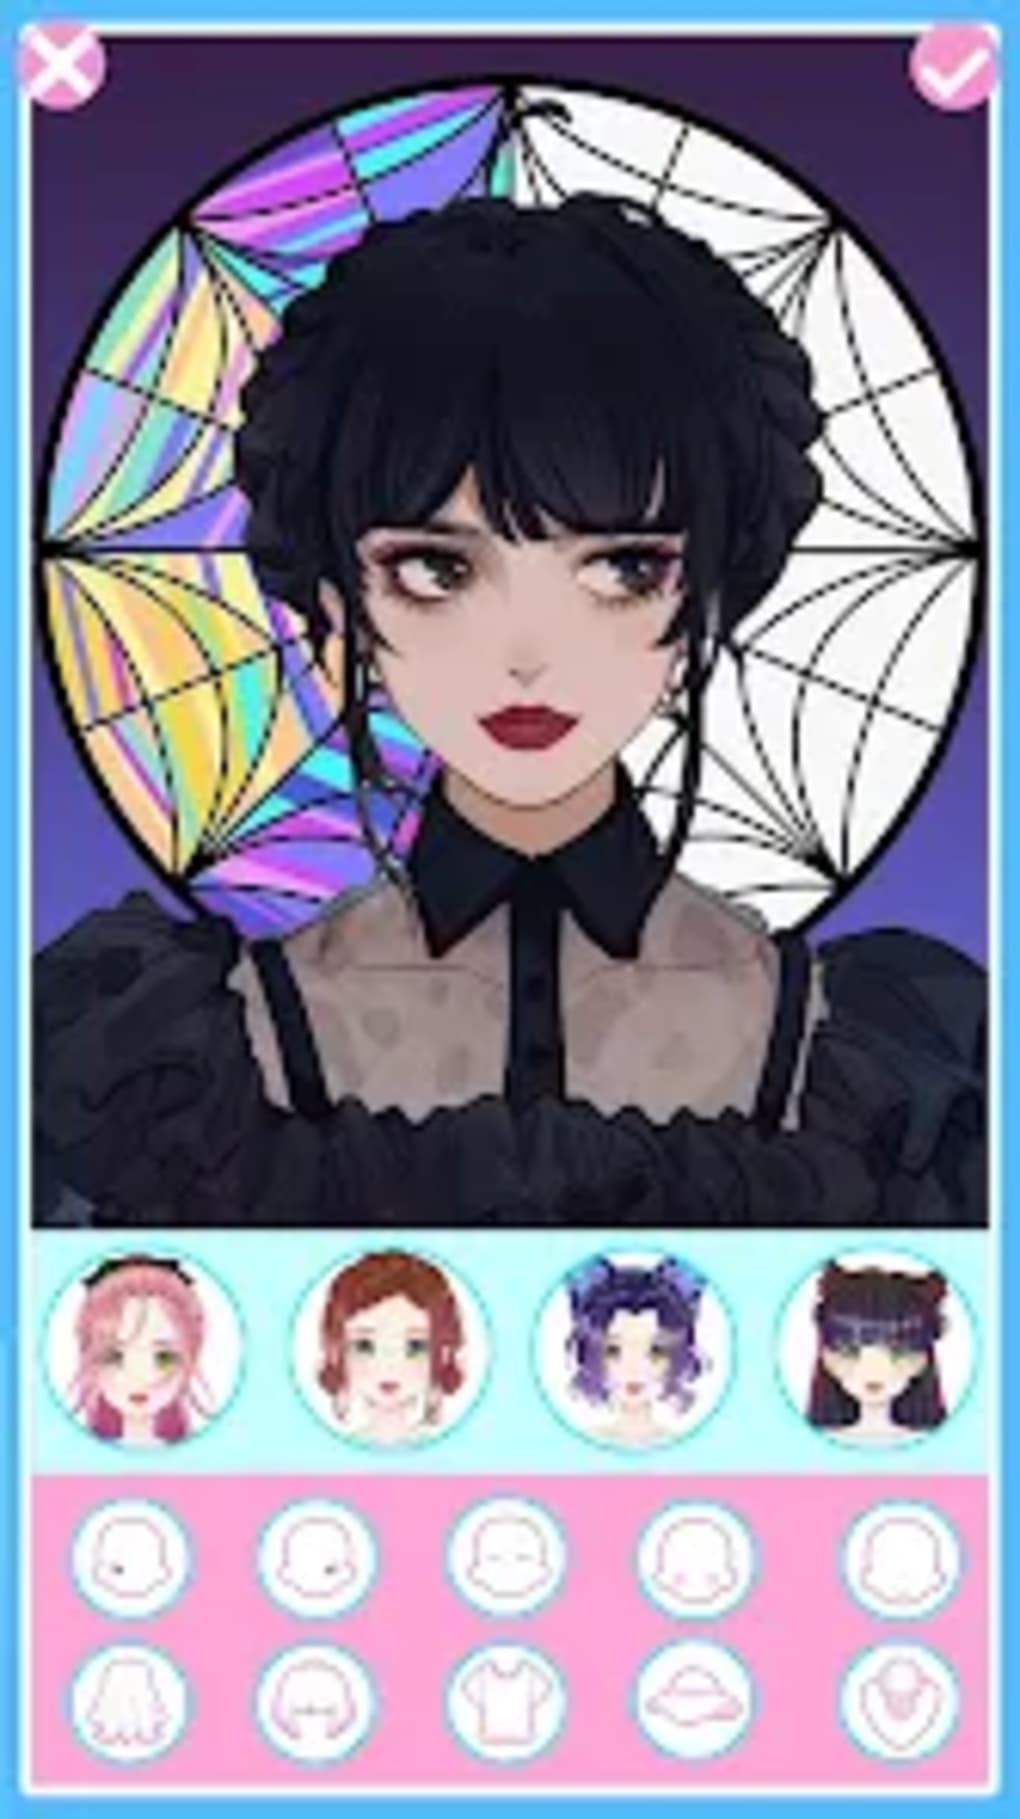 Anime Avatar Maker: Anime Doll APK for Android Download